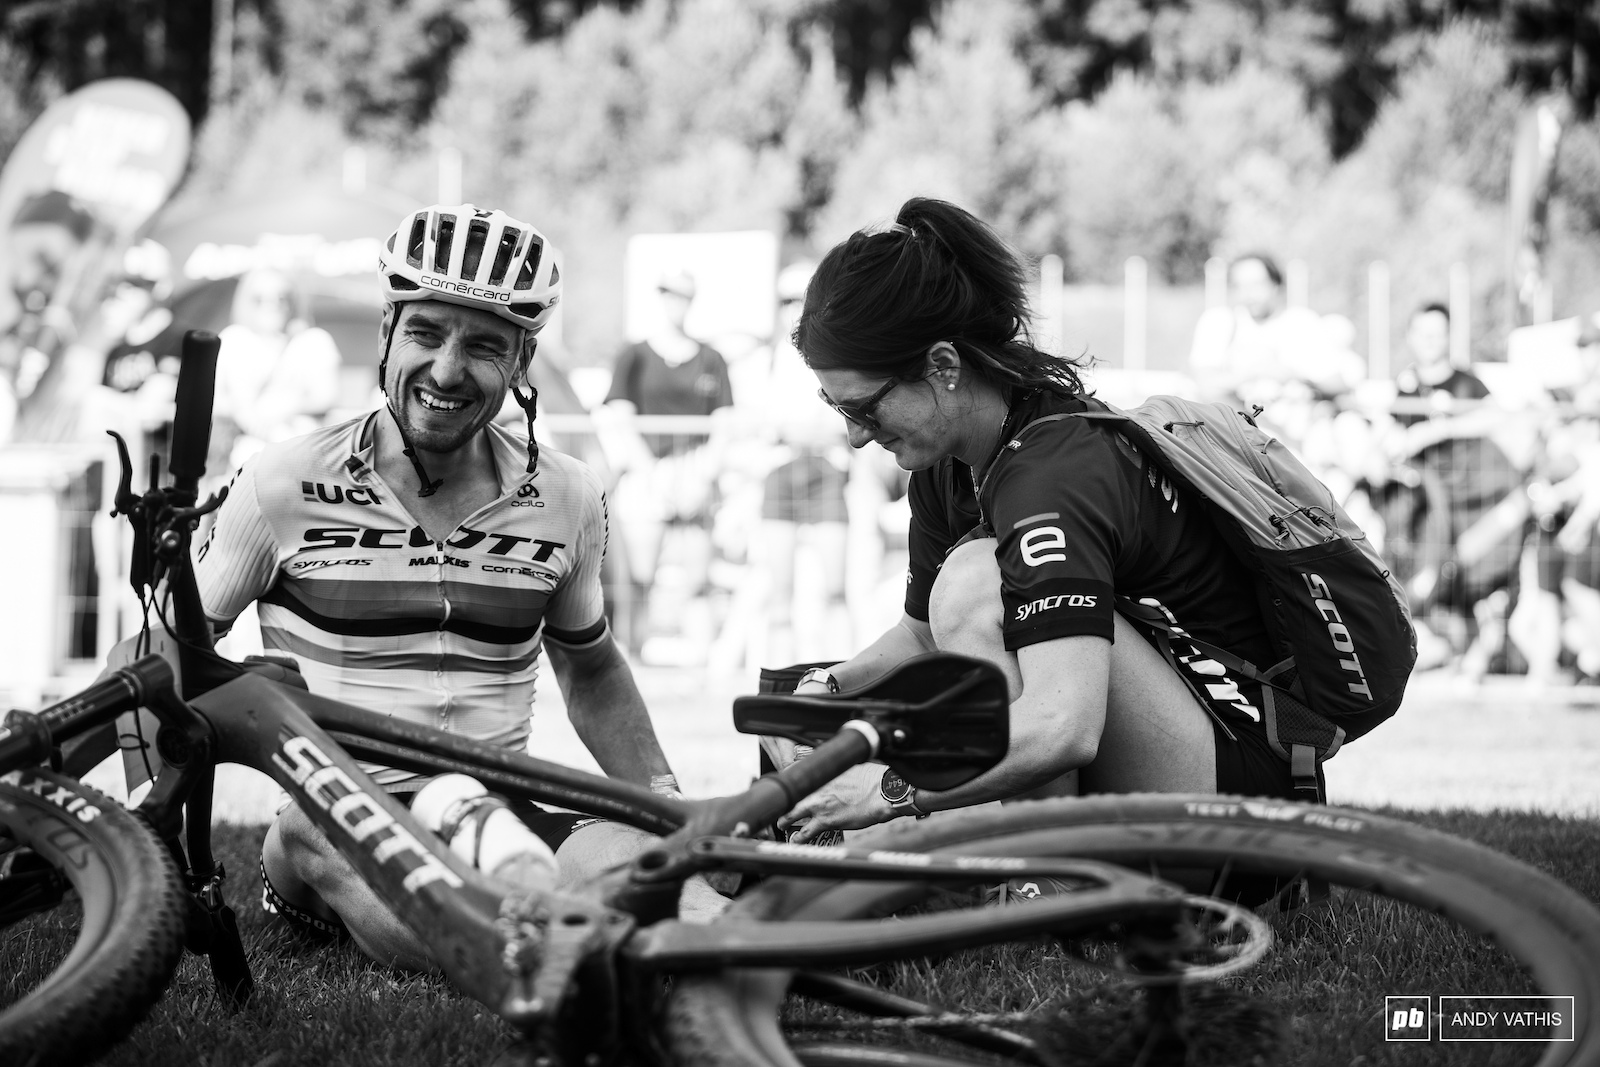 Hurting but satisfied Nino Schurter fought back hard after a mechanical.